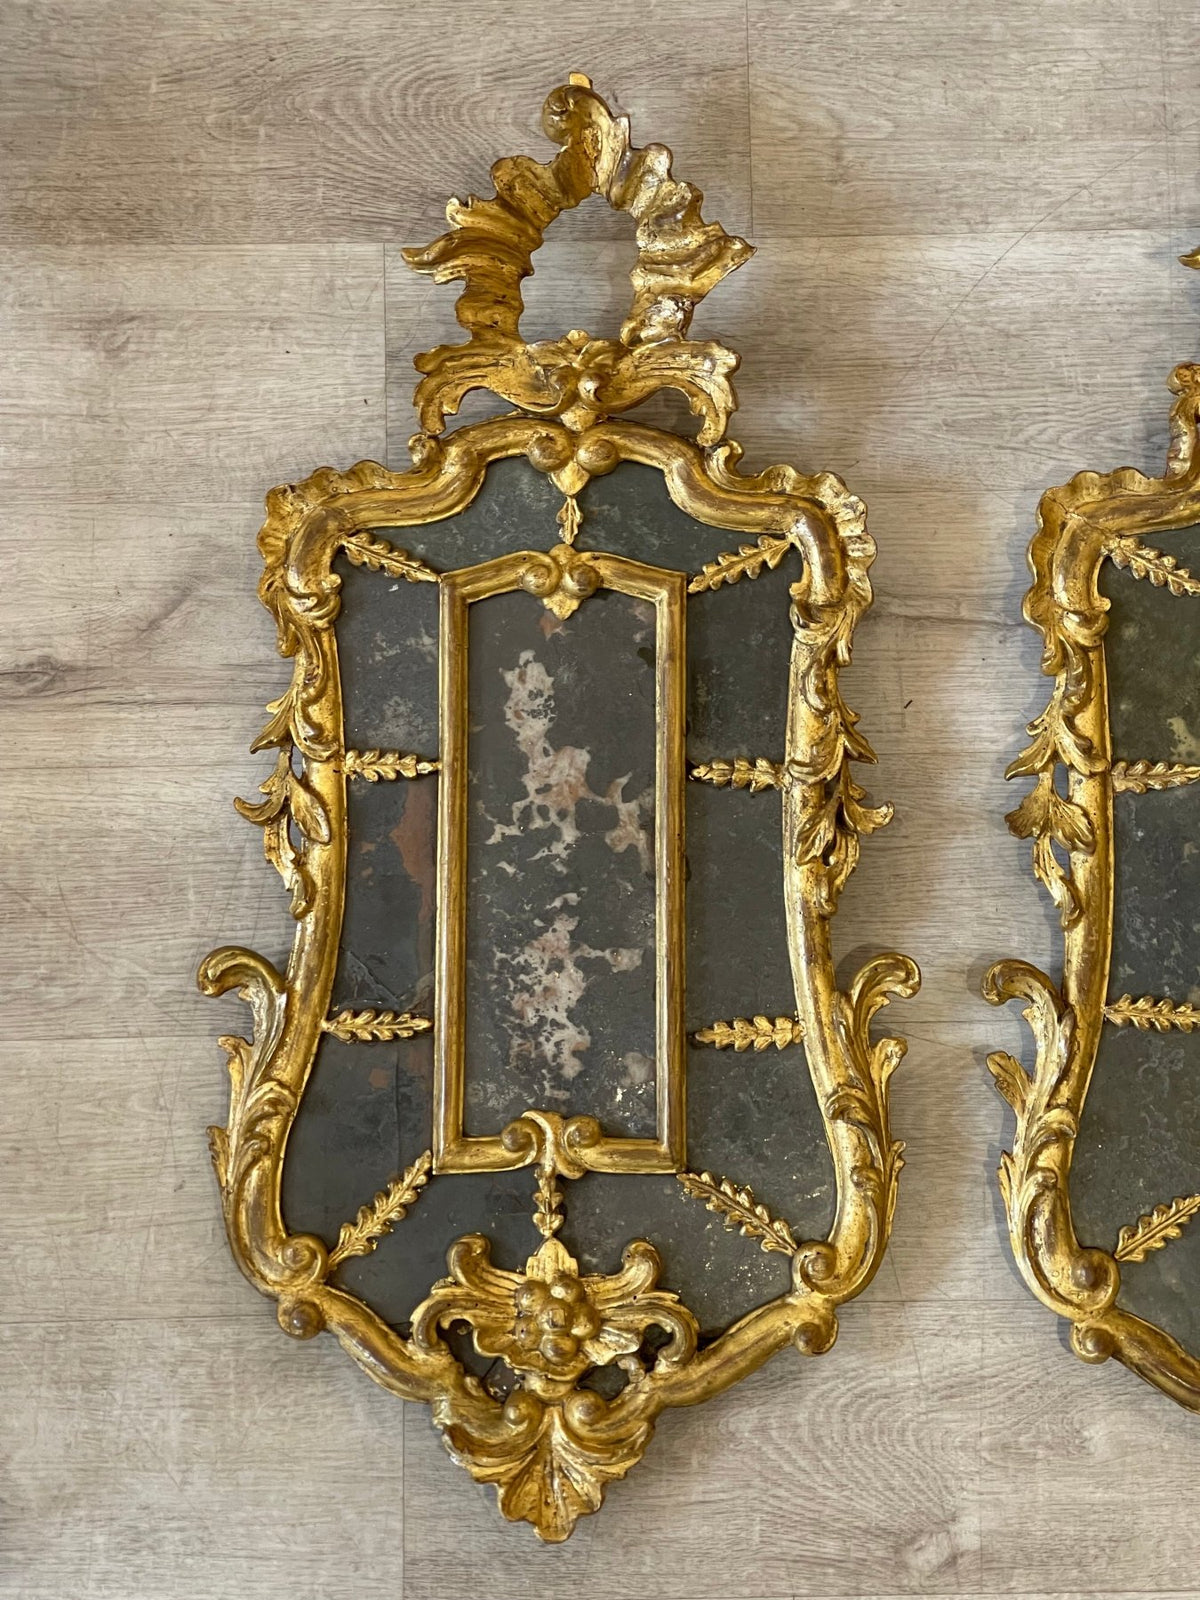 Rare Pair of Carved and Gilded Venetian Mirrors, 18th Century - Helen Storey Antiques